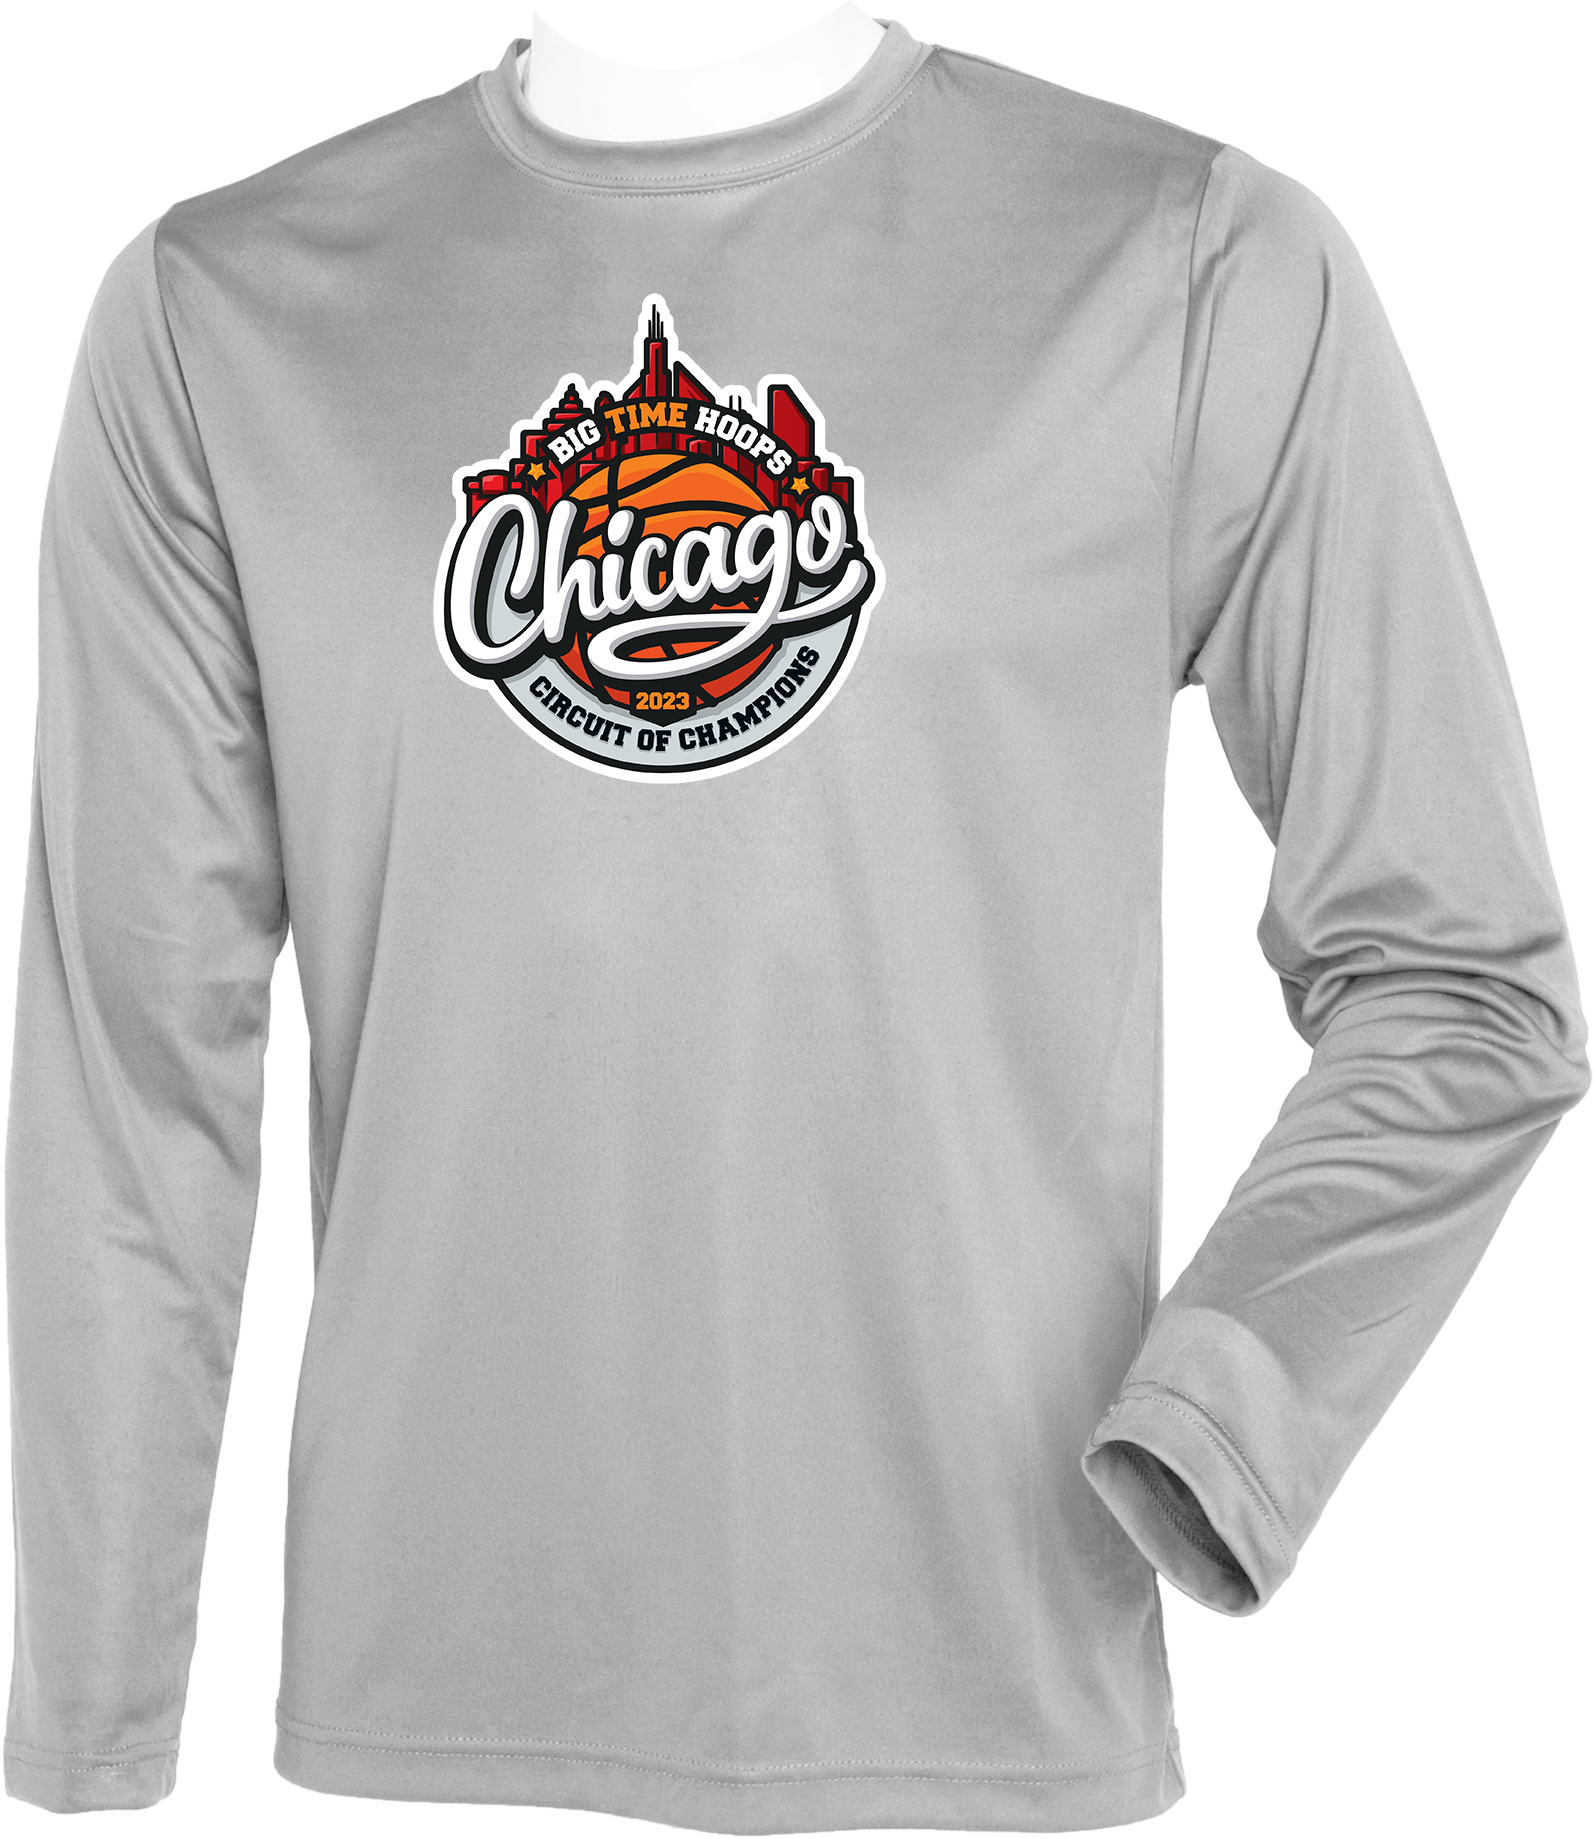 PERFORMANCE SHIRTS - 2023 Circuit of Champions CHICAGO